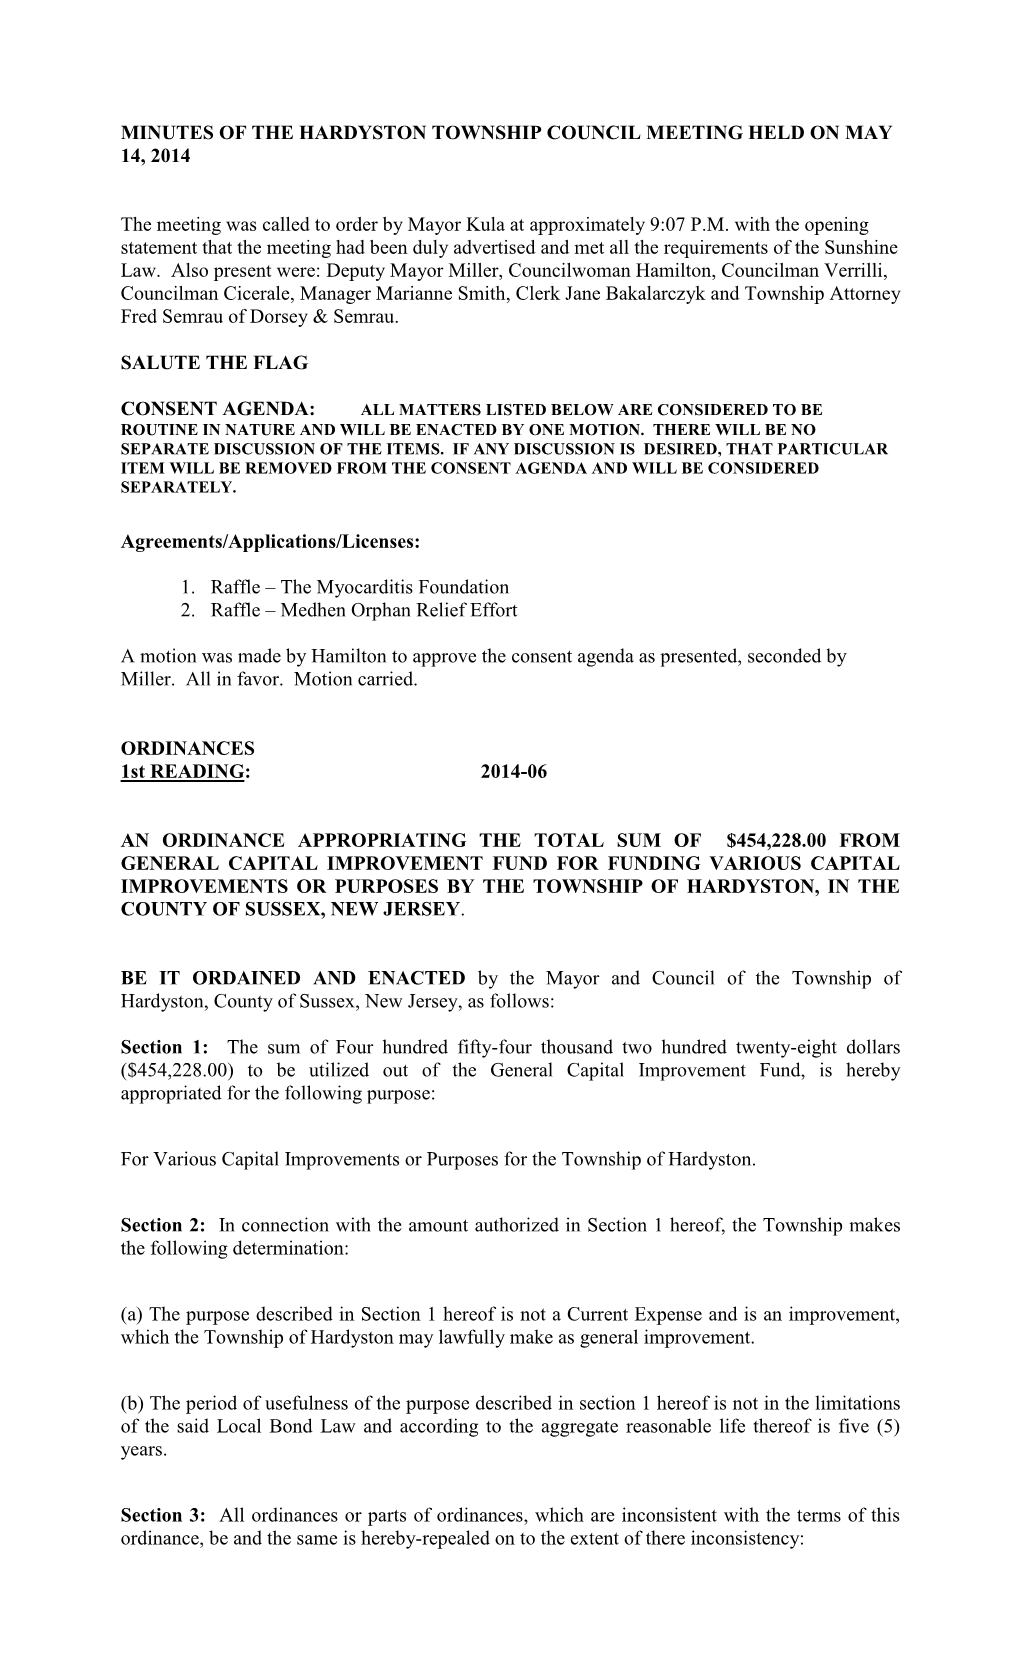 Minutes of the Hardyston Township Council Meeting Held on May 14, 2014